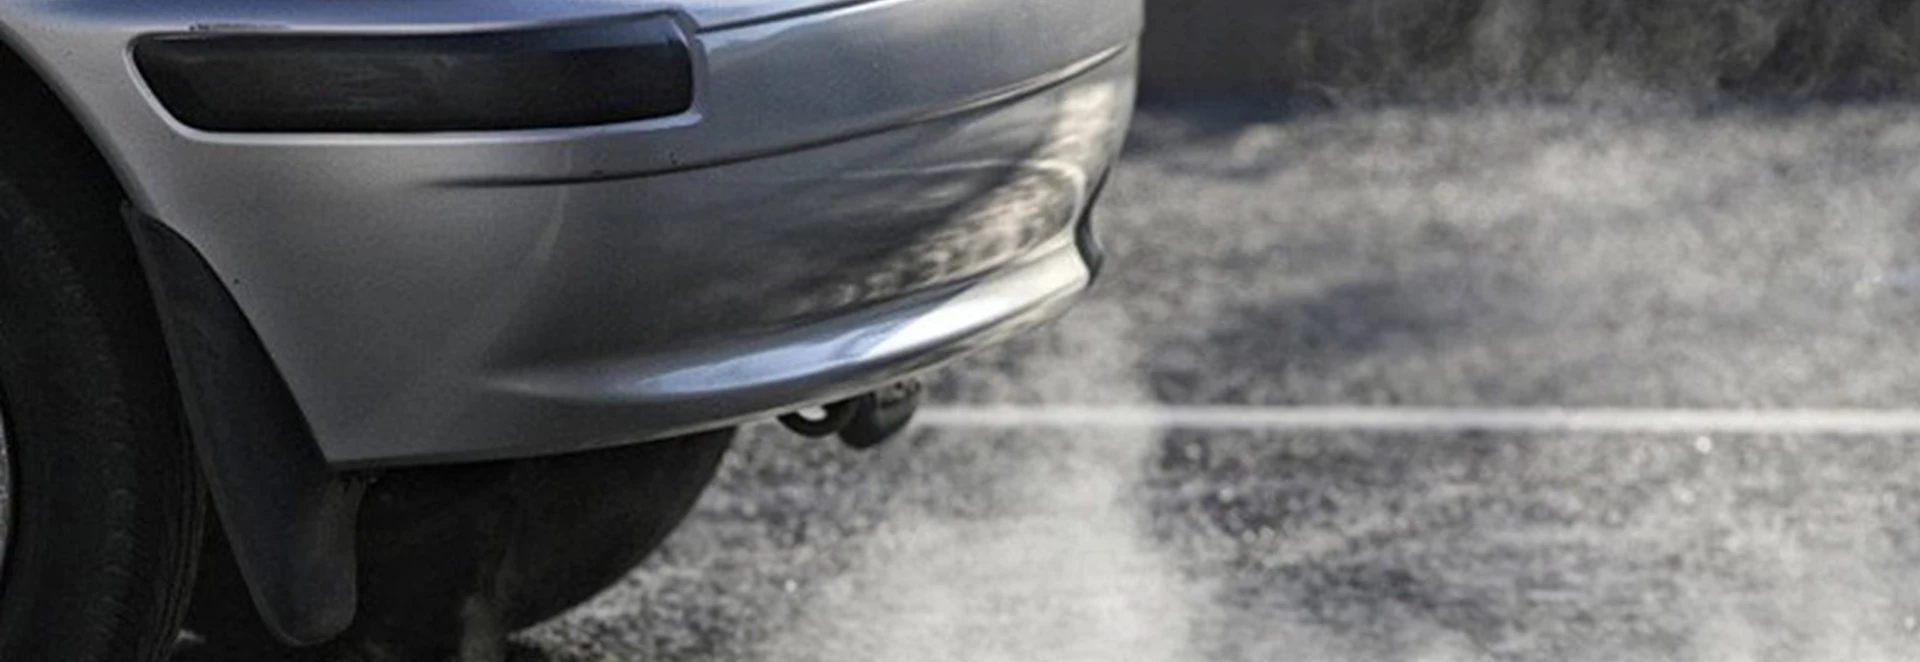 Smoke from your exhaust explained 